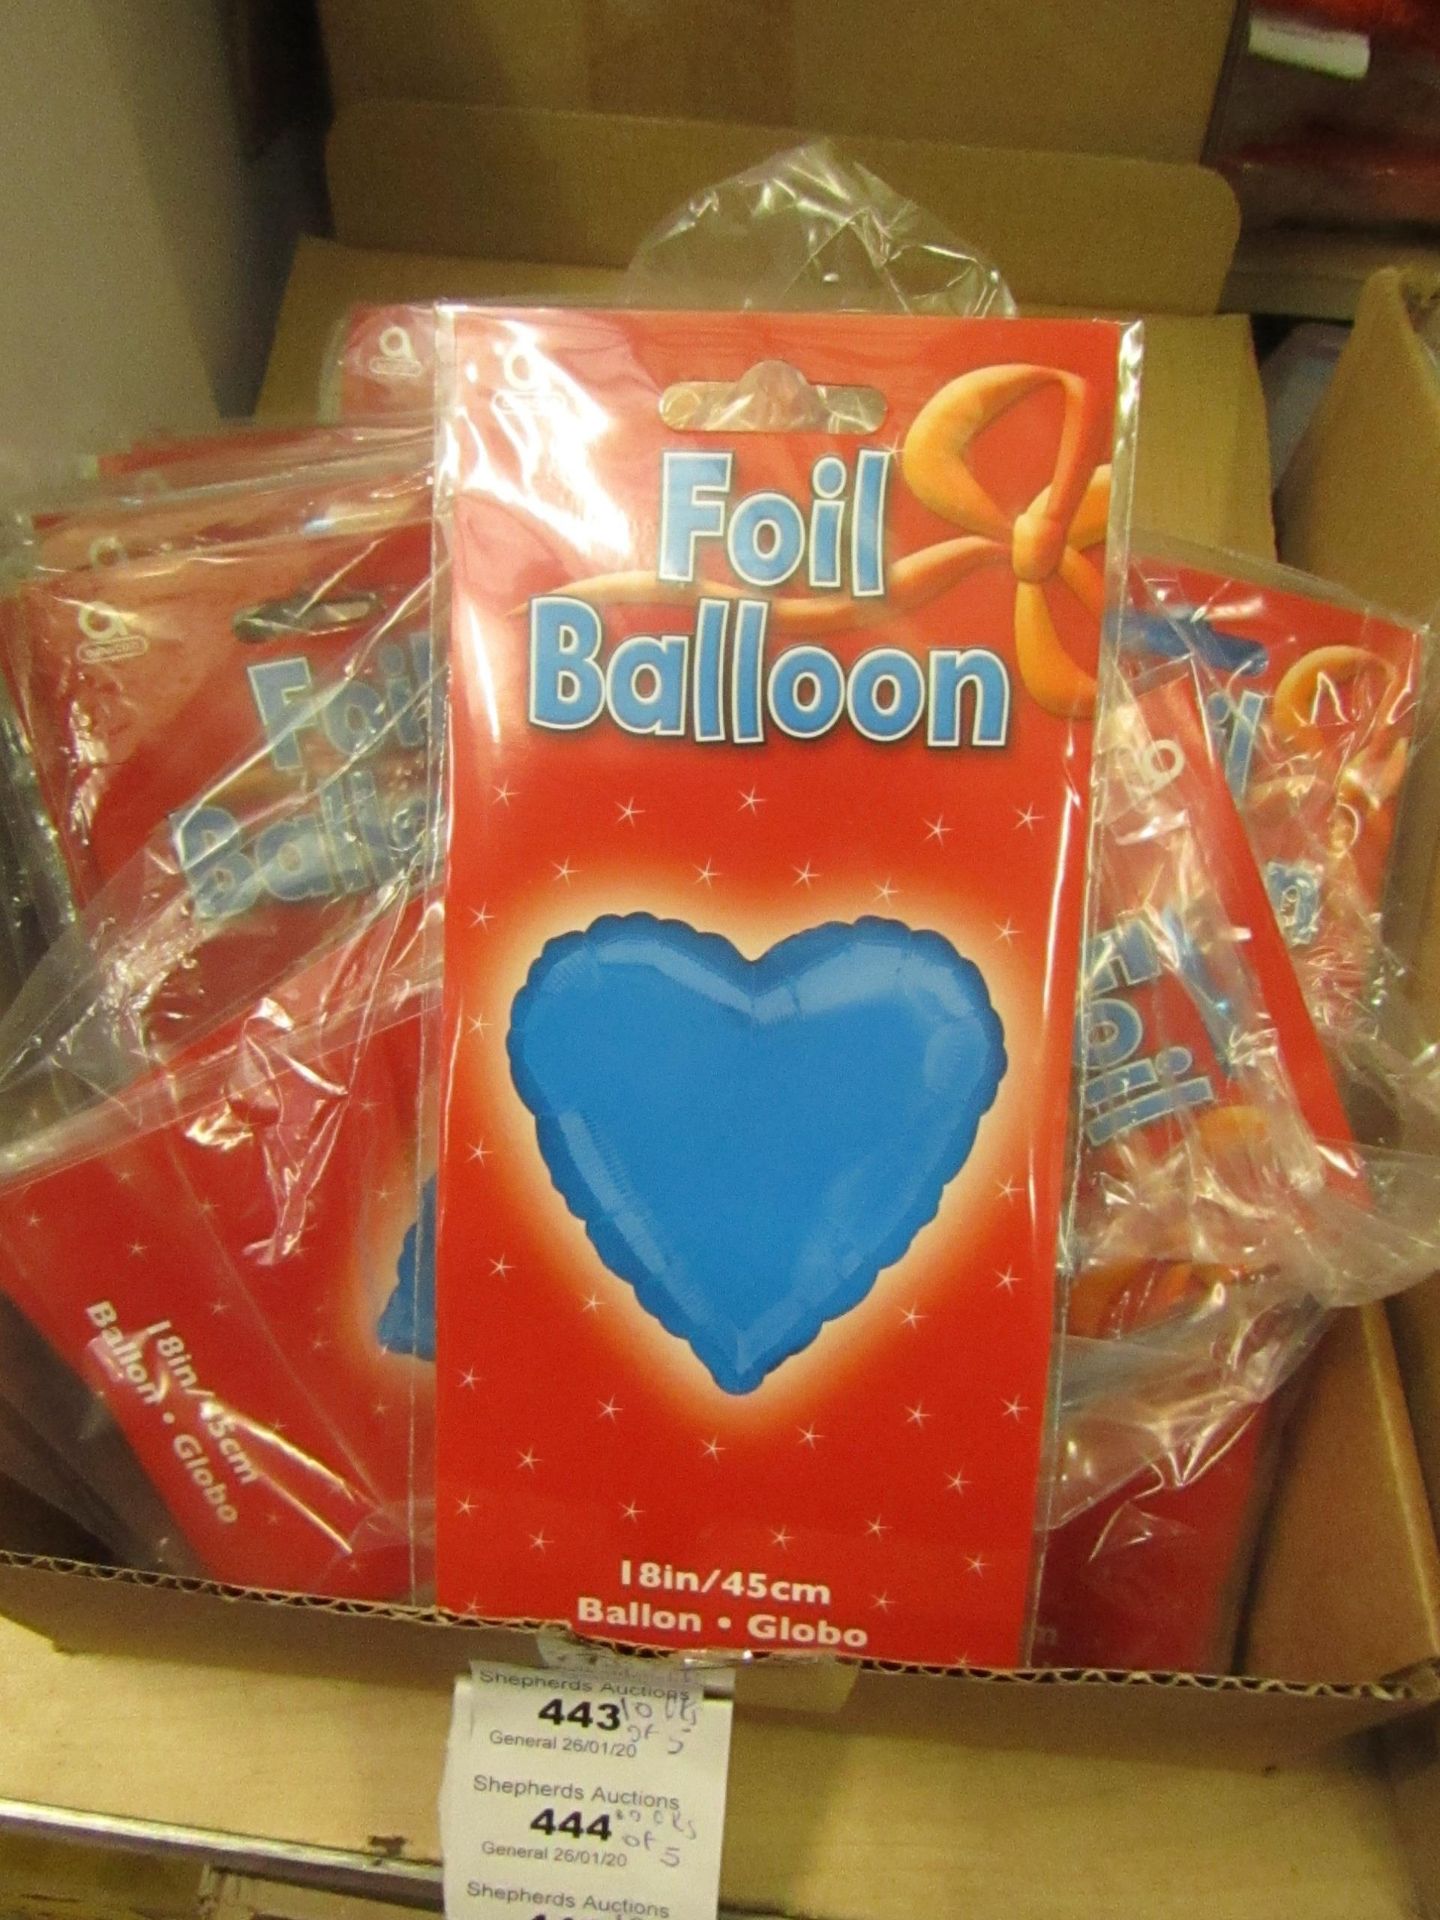 10 x Foil Balloons.Unused & Packaged